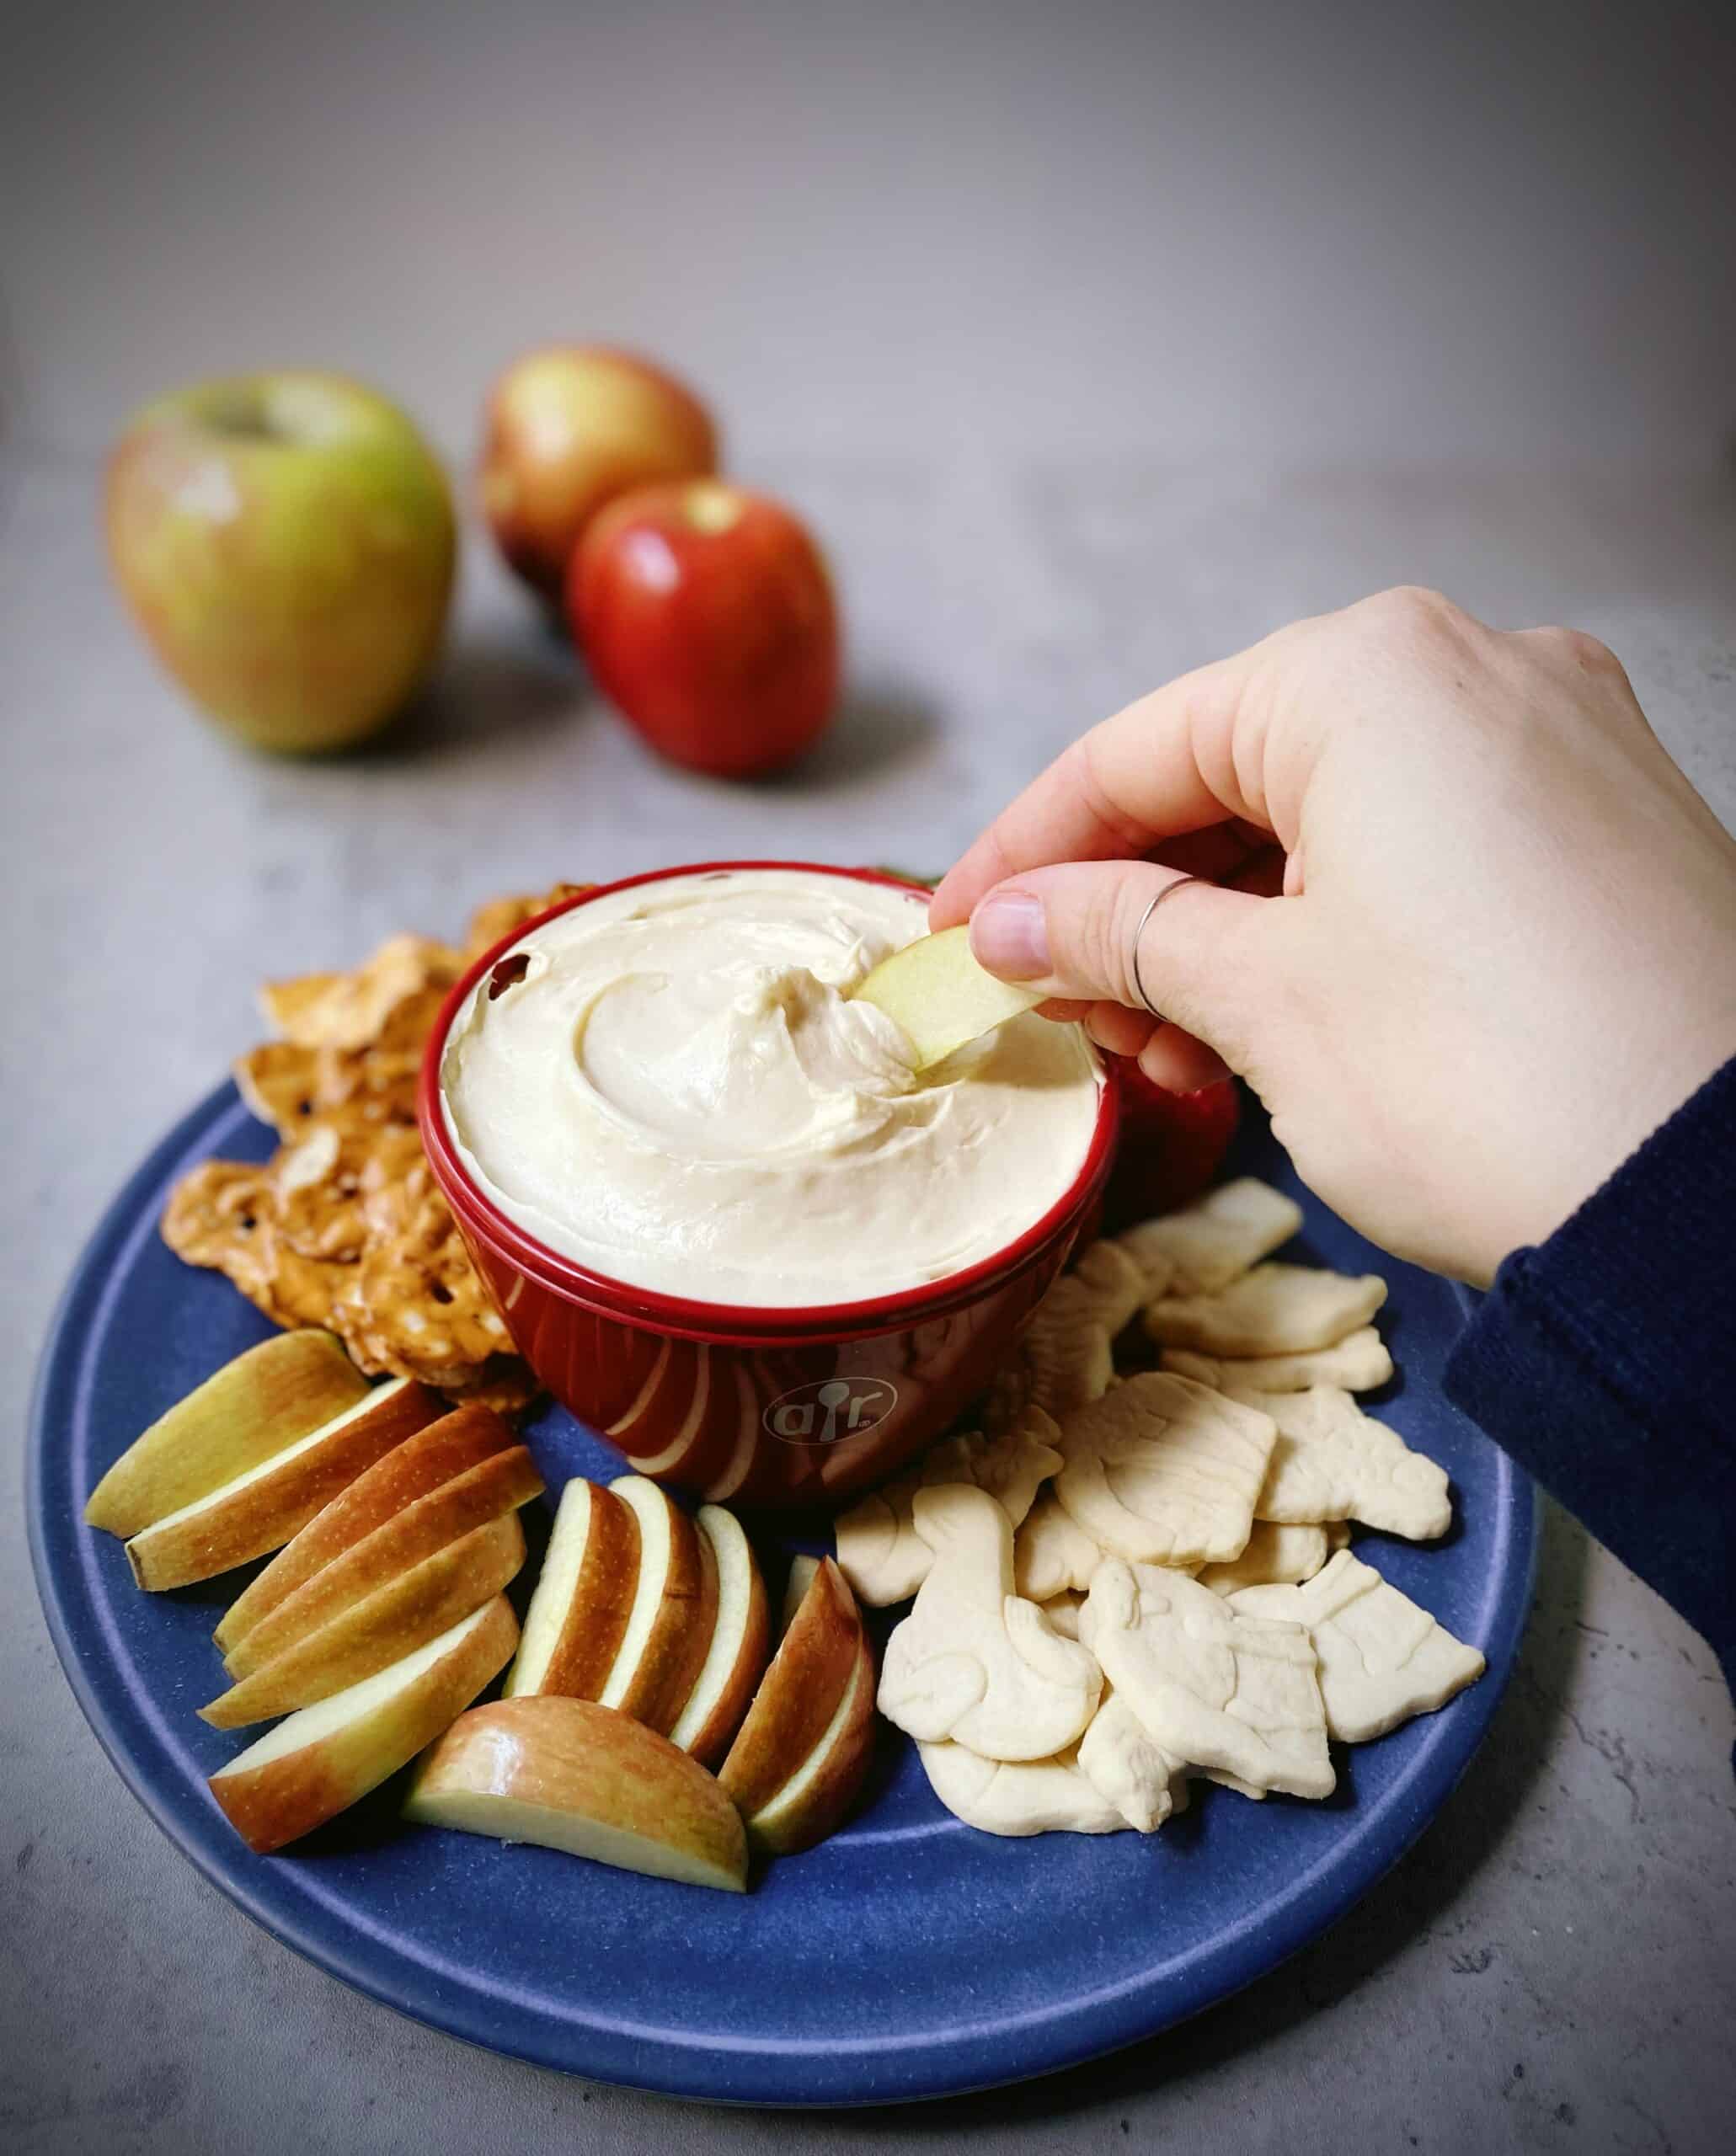 hand dipping an apple in the cream cheesecake dip.